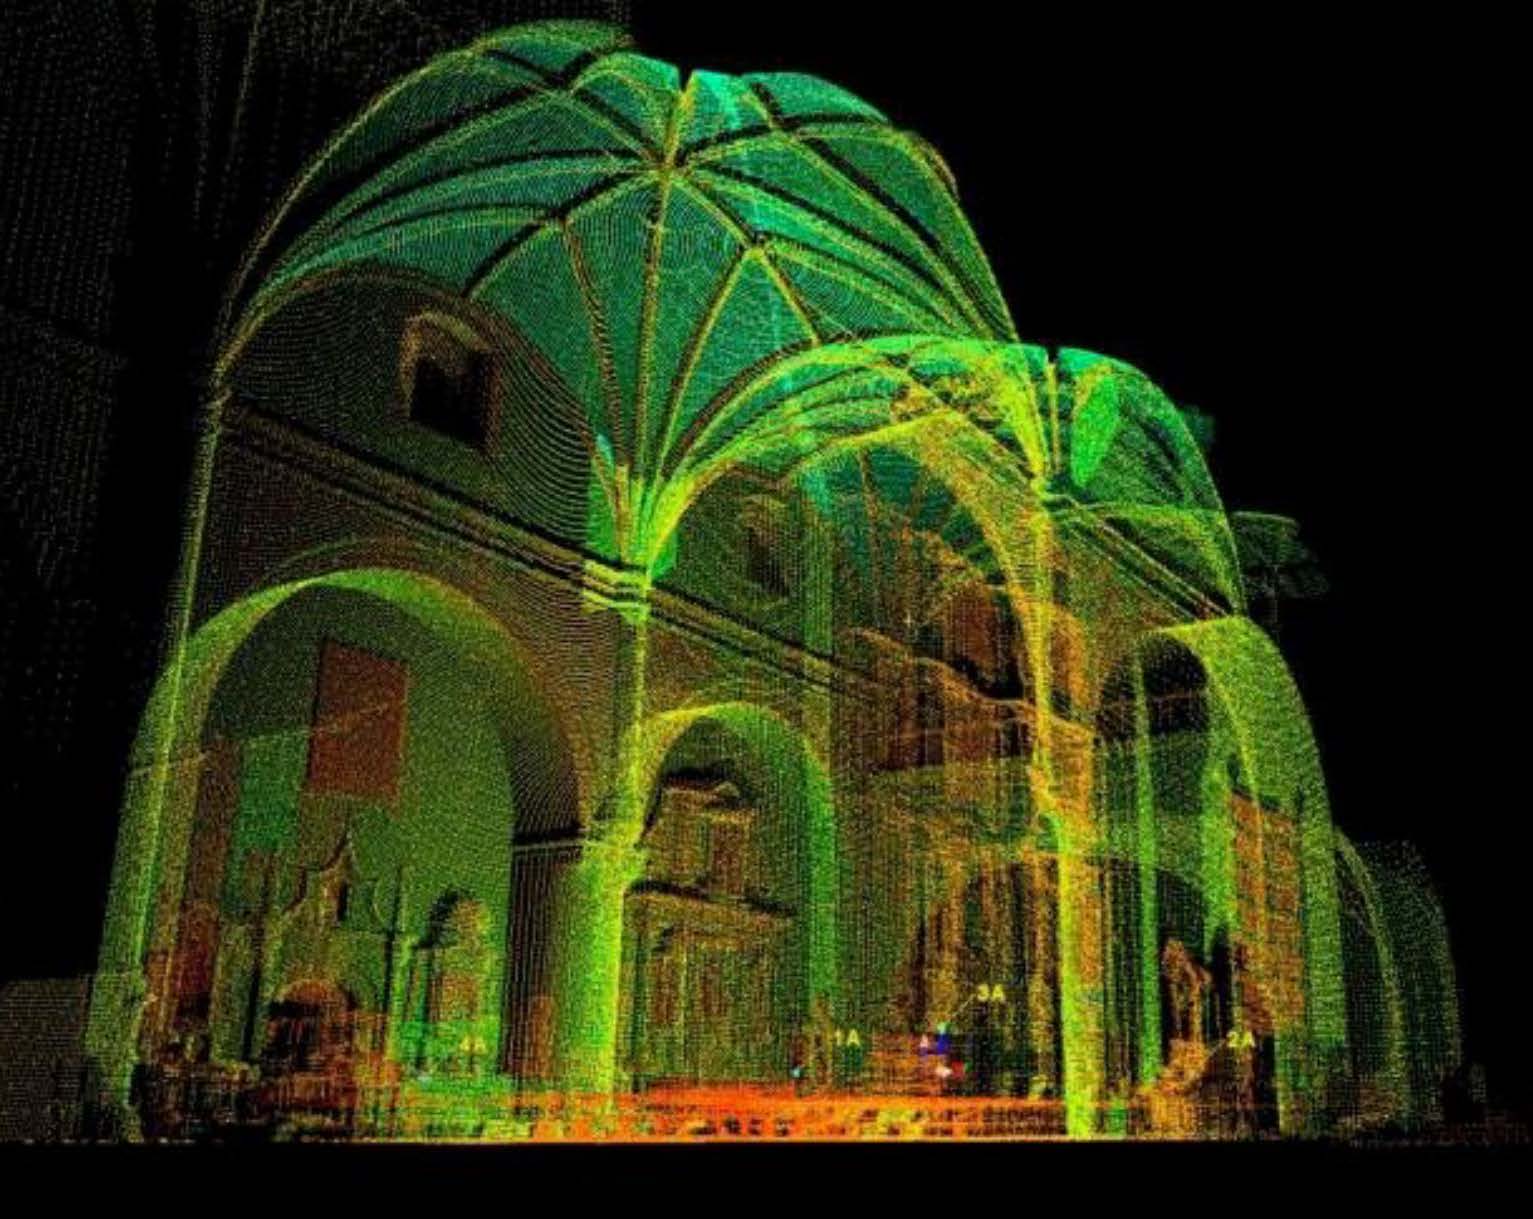 LiDAR scan of the interior of a church showing details of the vaulted ceiling